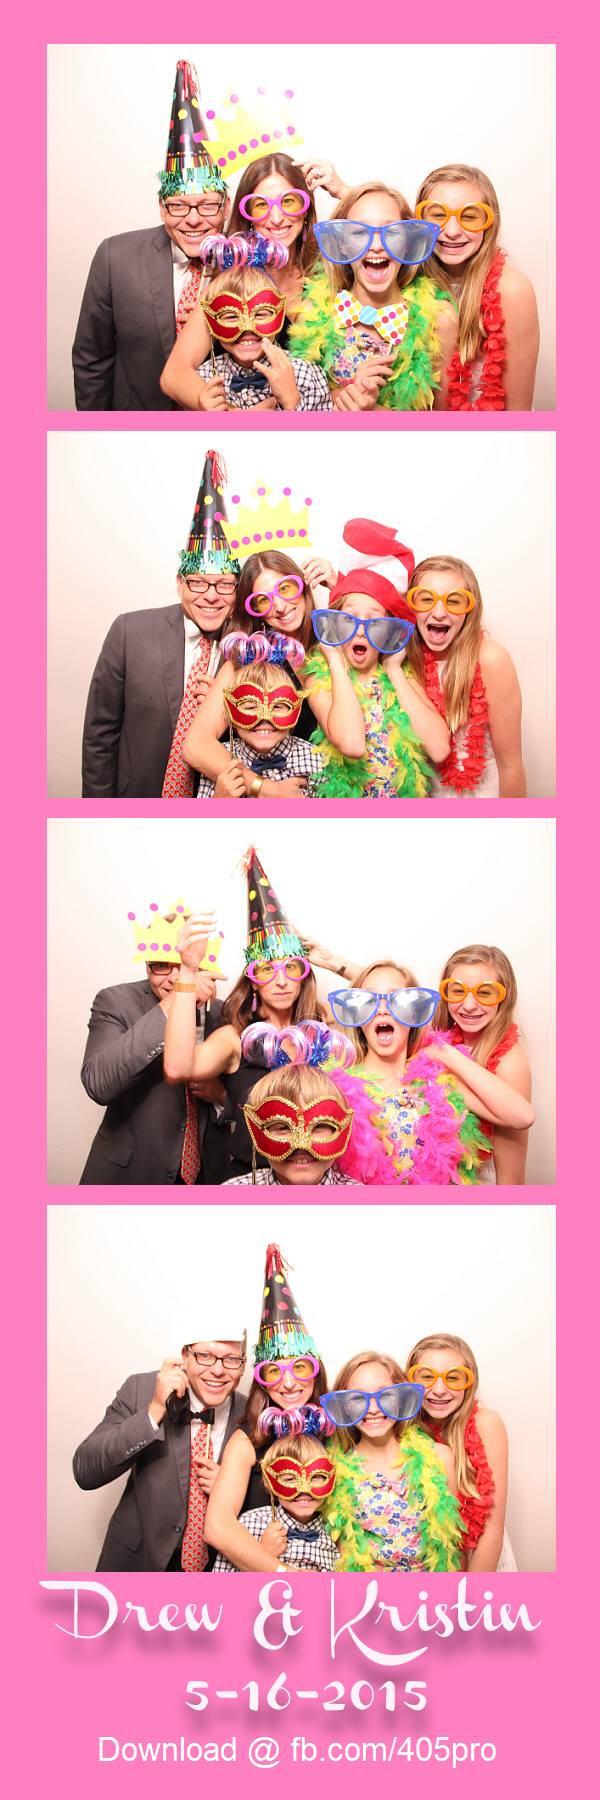 Oklahoma City Photo Booth Rentals The Manor At Coffee Creek